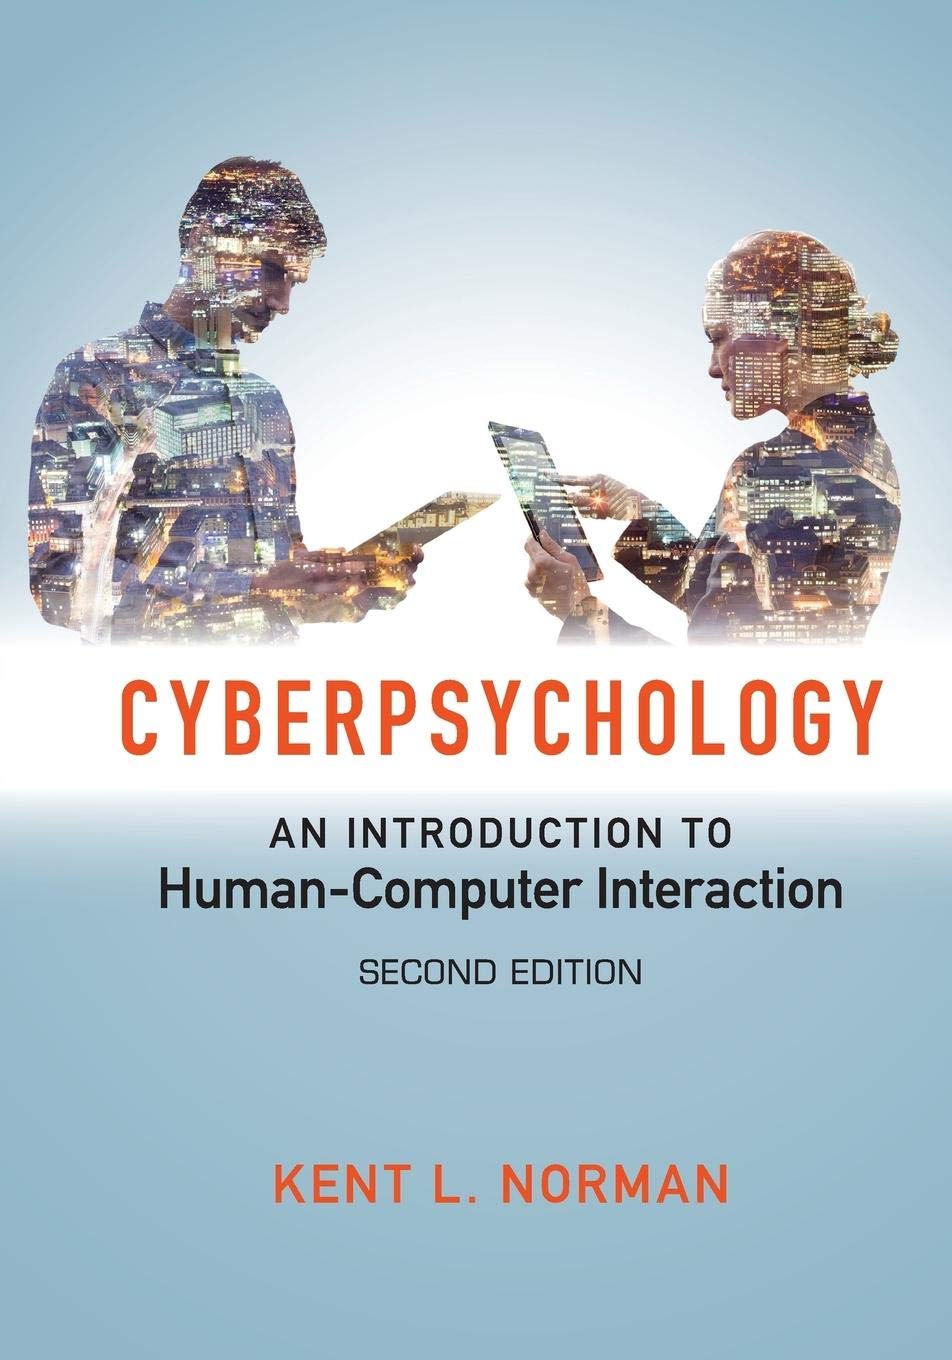 Cyberpsychology: Intro to HCI